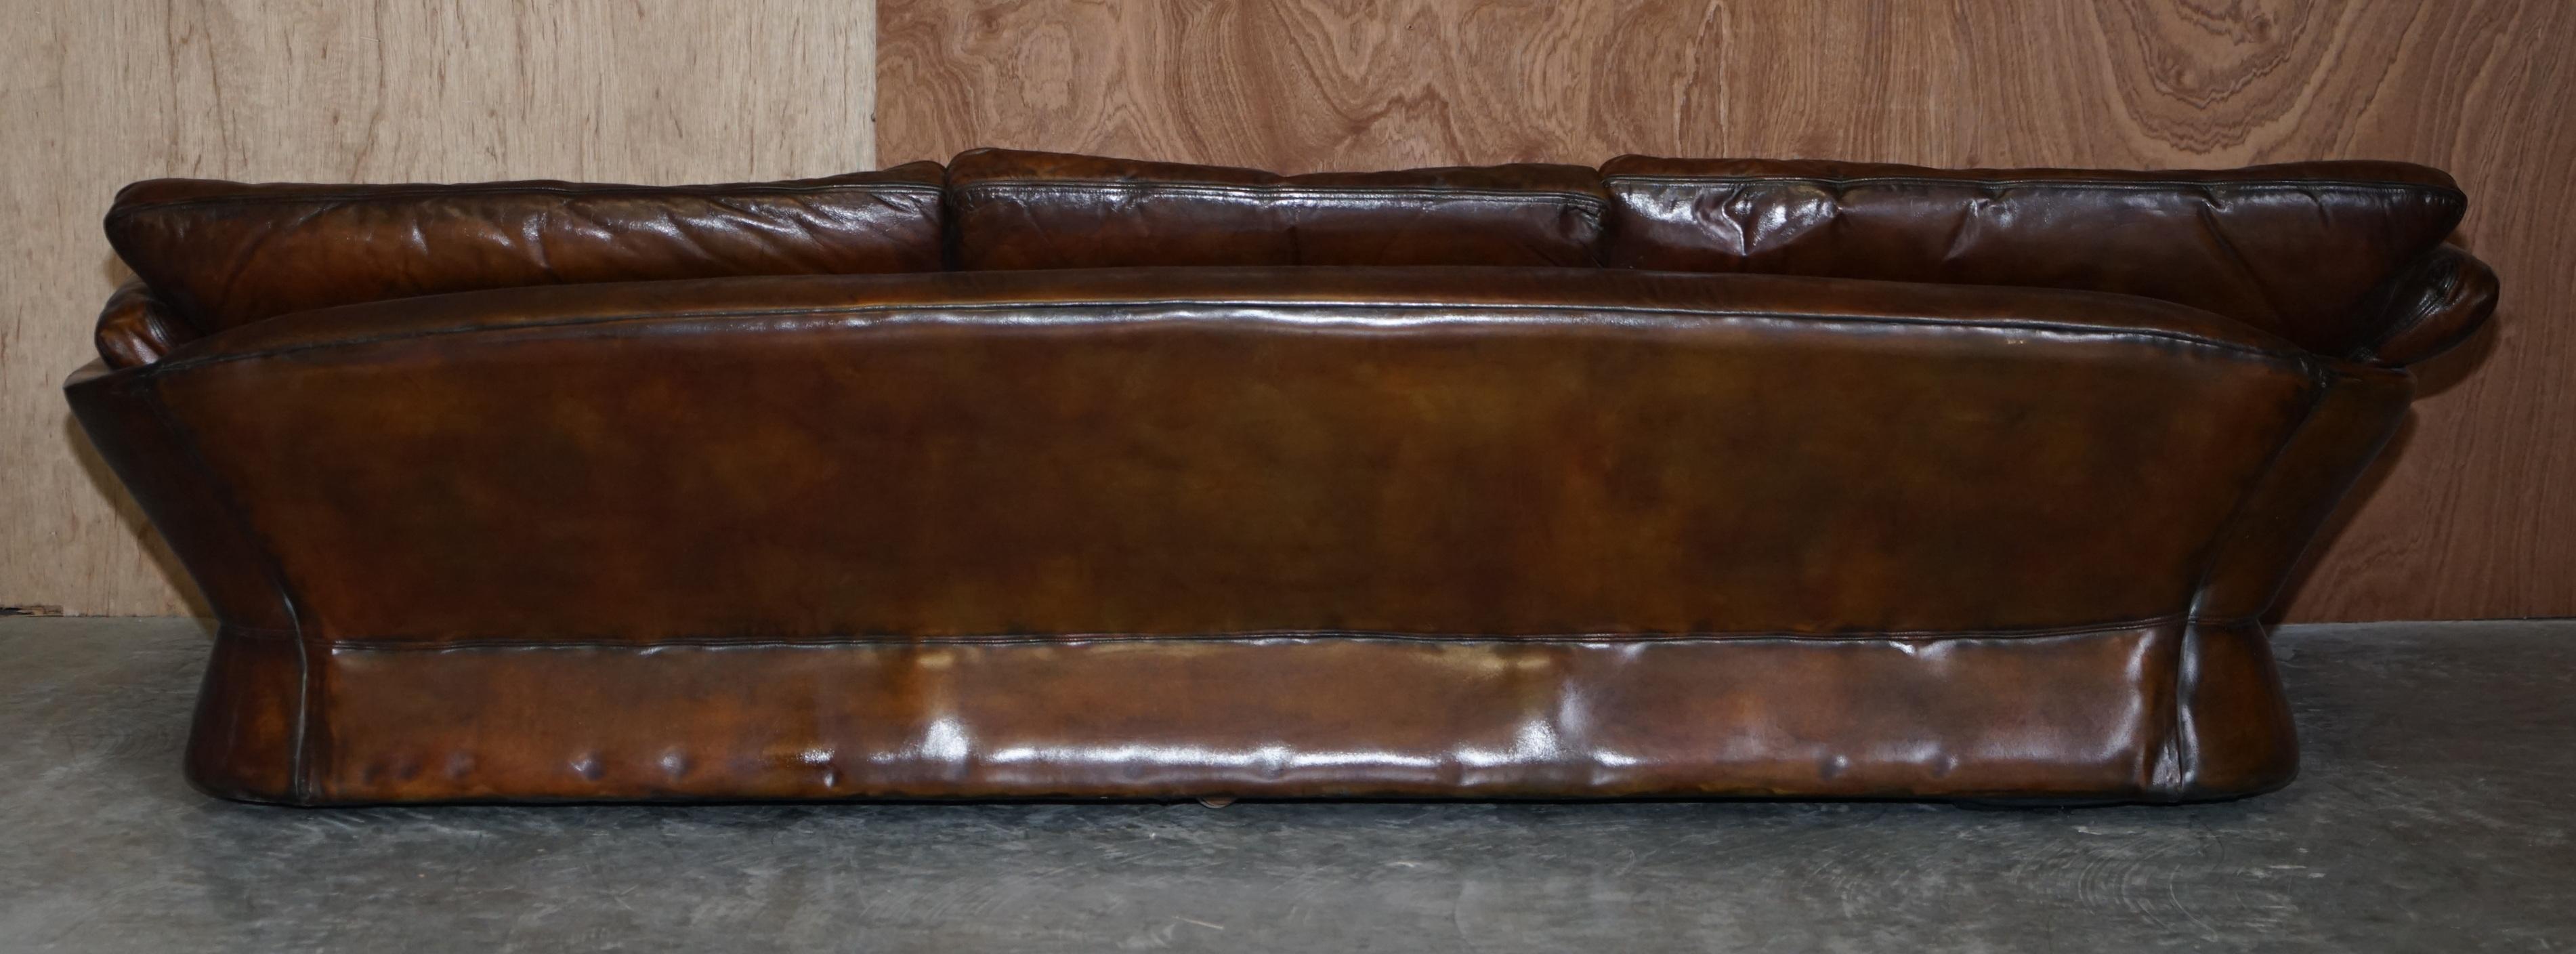 Super Rare Low Mid-Century Modern Designer Fully Restored Brown Leather Sofa For Sale 7